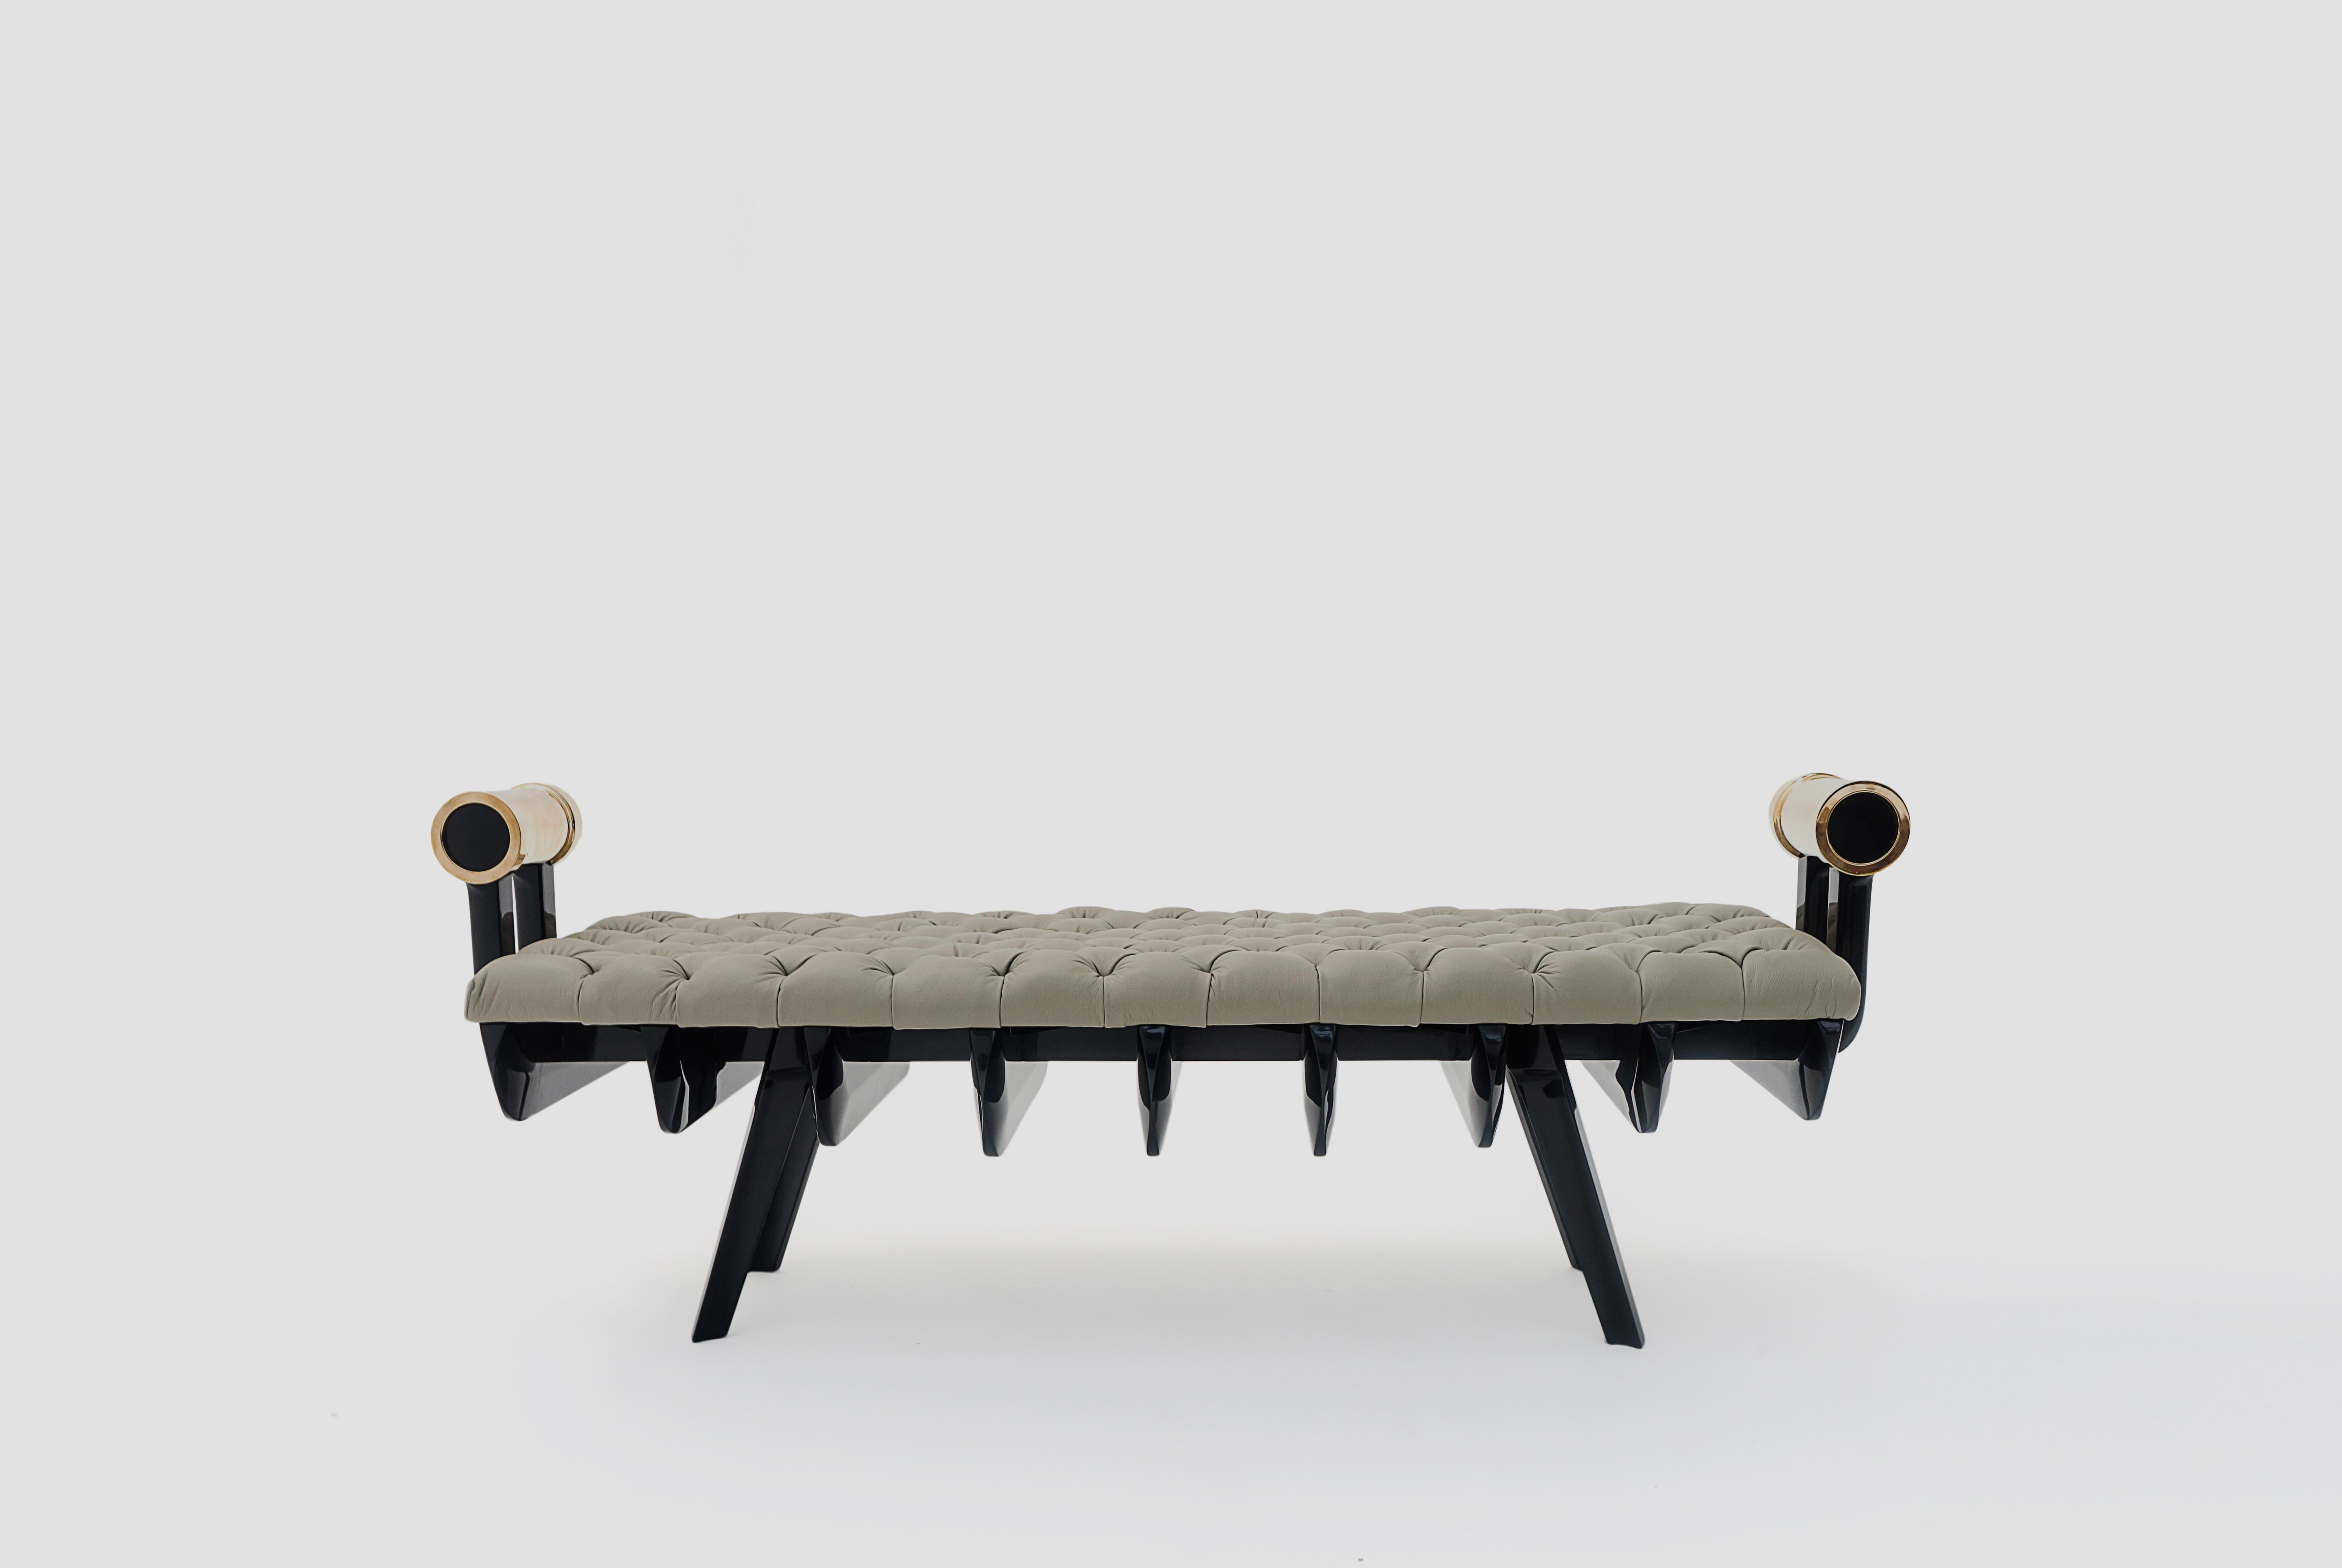 Diseño y Ebanistería was the first furniture collection, where great designers of the Mexican scene collaborated with BREUER to demonstrate our mastery in cabinetmaking and carpentry through extraordinary pieces of design.

This piece was created by